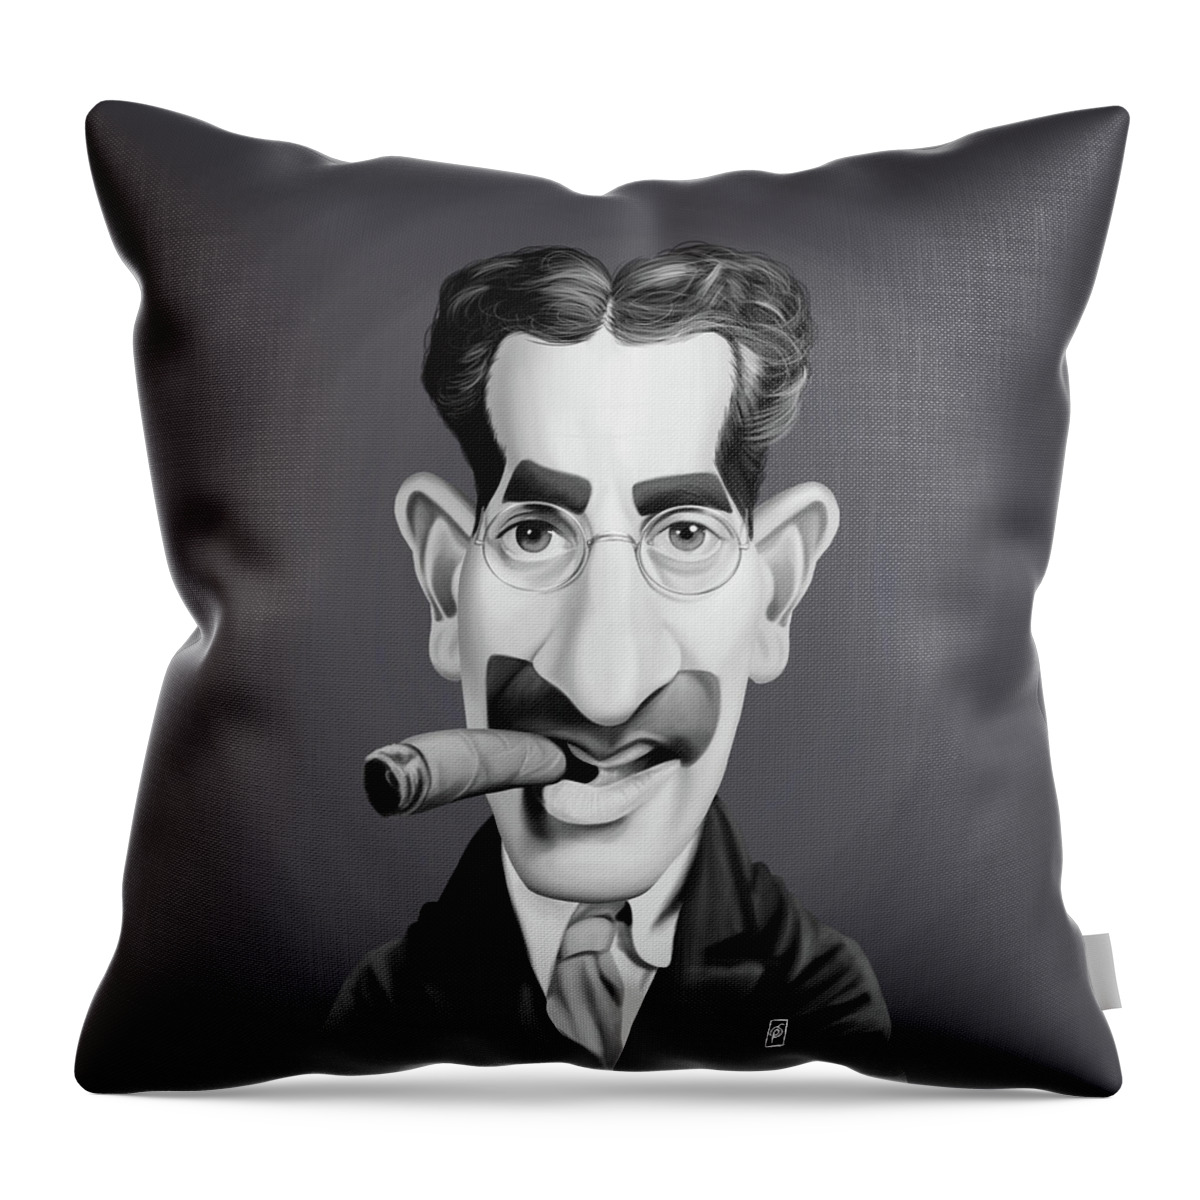 Illustration Throw Pillow featuring the digital art Celebrity Sunday - Groucho Marx by Rob Snow